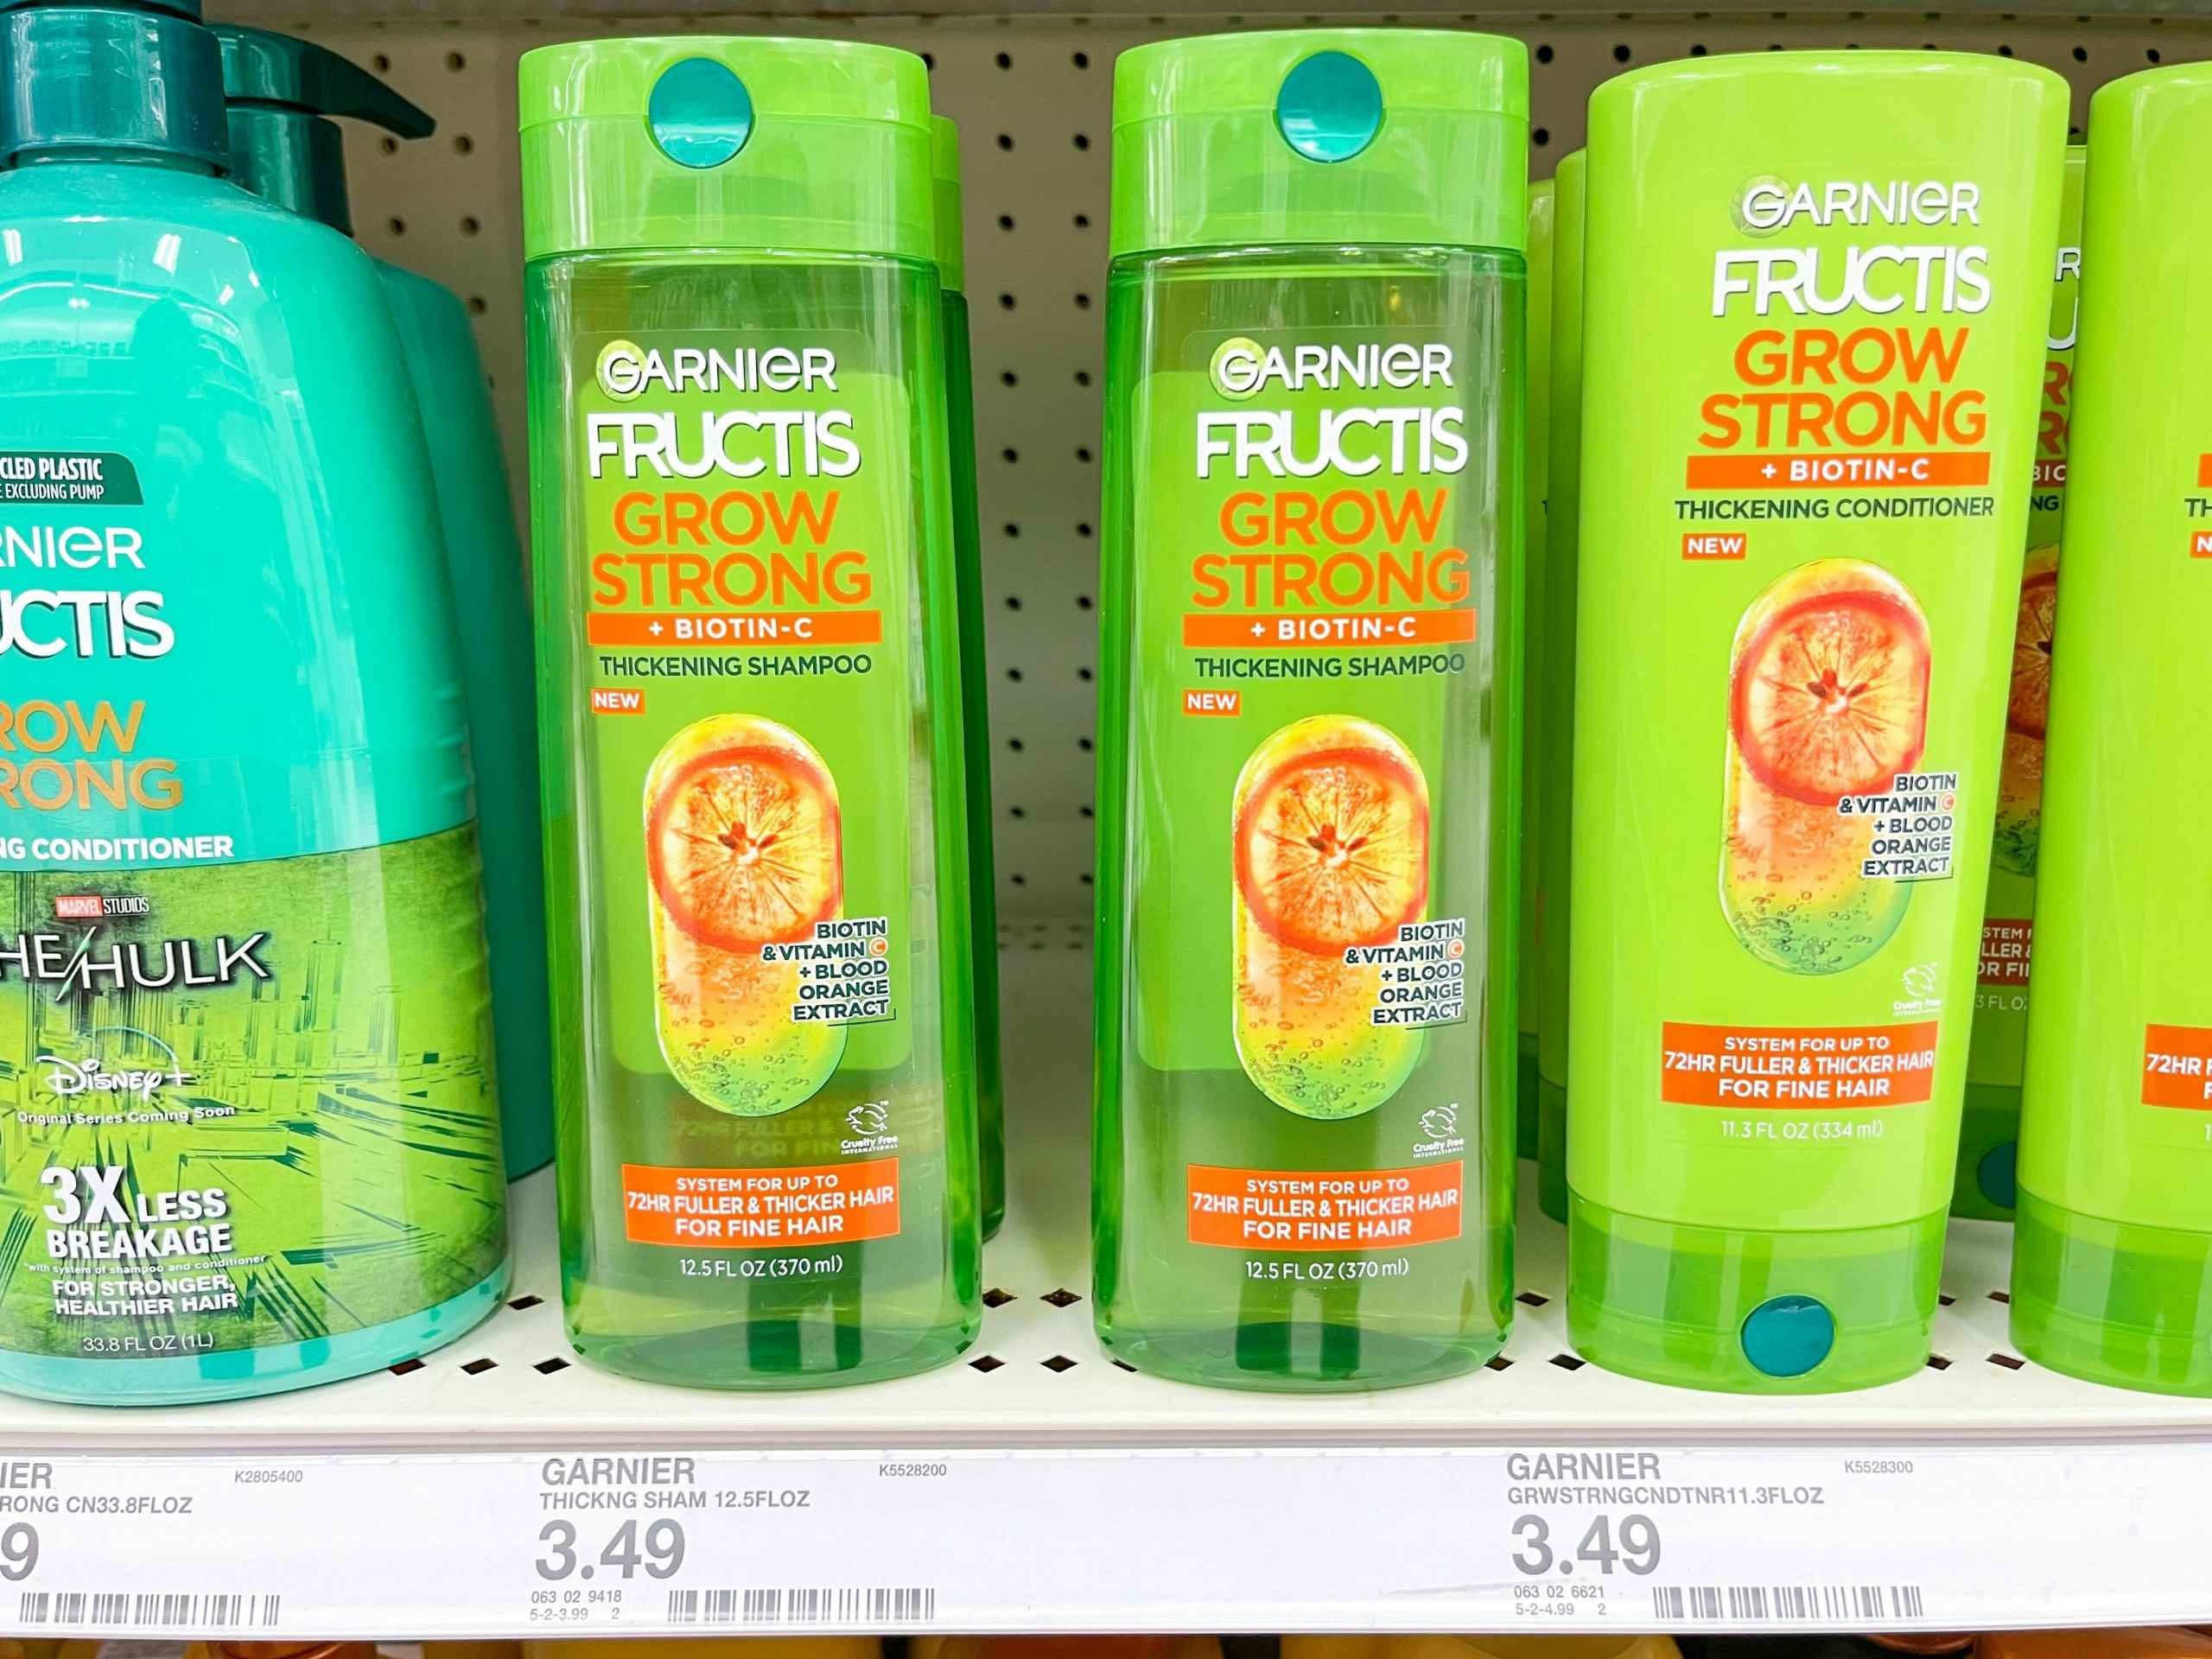 A variety of Garnier Fructis shampoos and conditions sitting on a store shelf.